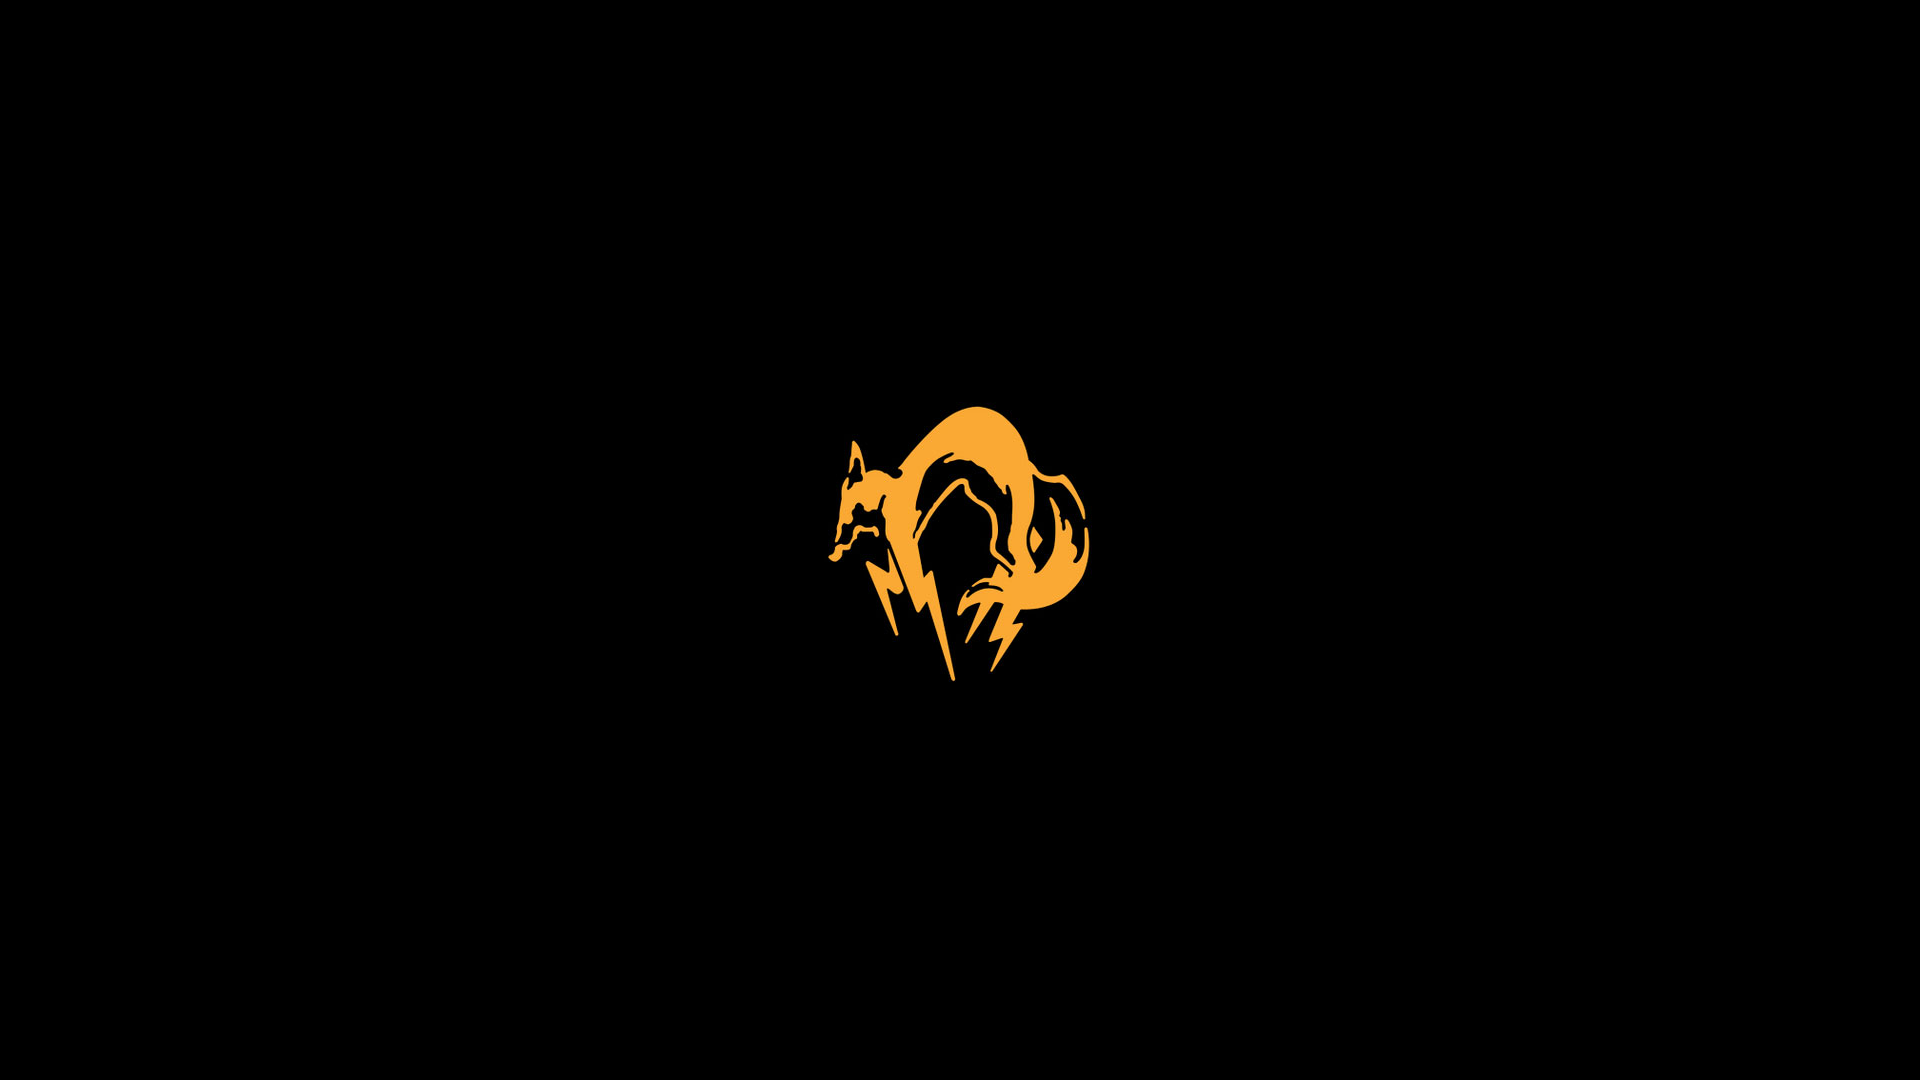 General 1920x1080 Metal Gear Solid fox minimalism FOXHOUND video games video game art simple background black background